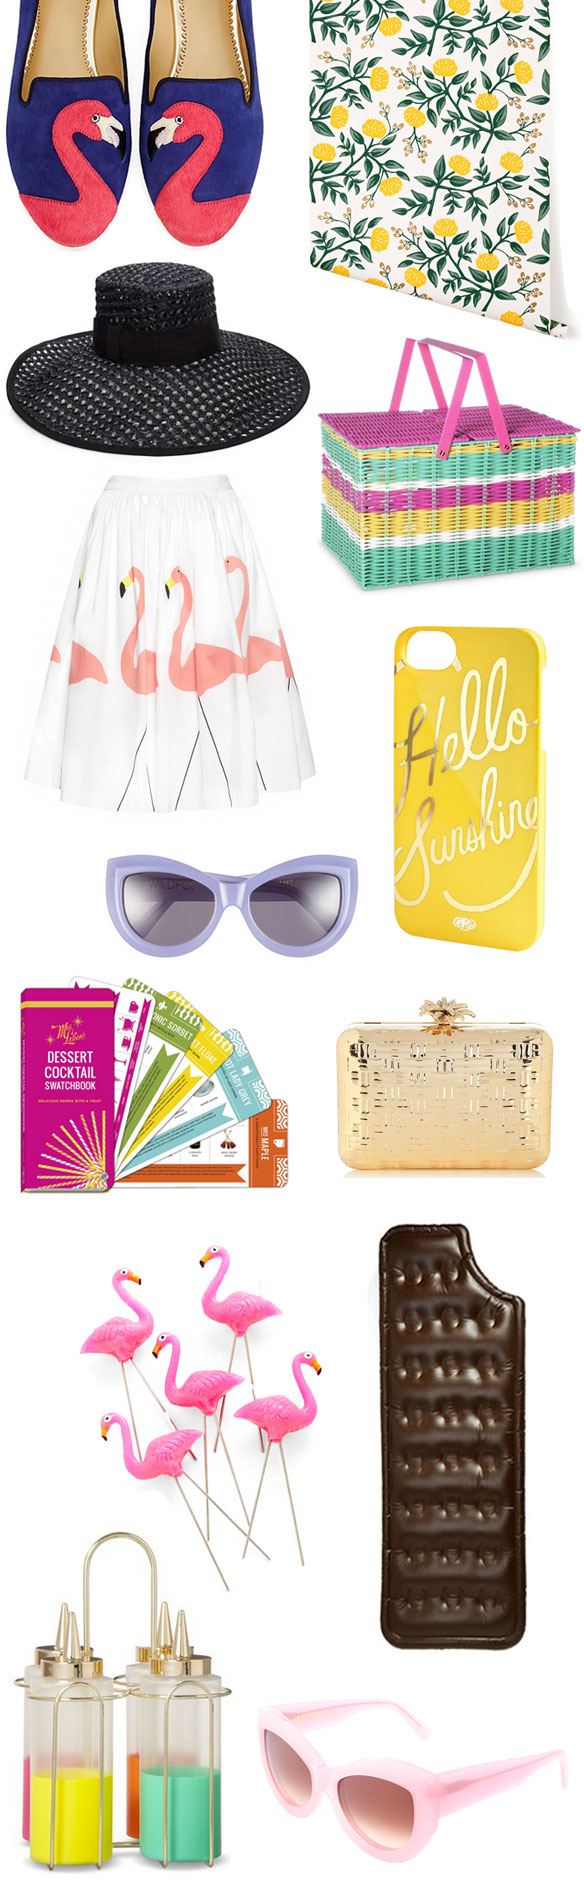 summer wishlist alice and olivia flamingo skirt; flamingo flats; flamingo shoes; flamingo heels; flmaingo driving shoes; flamingo slippers c wonder; pineapple clutch; pineapple bag; pineapple accessories; cute picnic baskets; affordable but cute picnic baskets; purple sunglasses; wildfox lavender sunglasses; mrs lilien's dessert cocktail swatchbook; fun hostess gifts; cute sunhats; kate spade sunhat; oversized sunhat; black sunhat; rifle paper co wallpaper peonies wallpaper peony wallpaper; ice cream sandwich pool float; flamingo candles